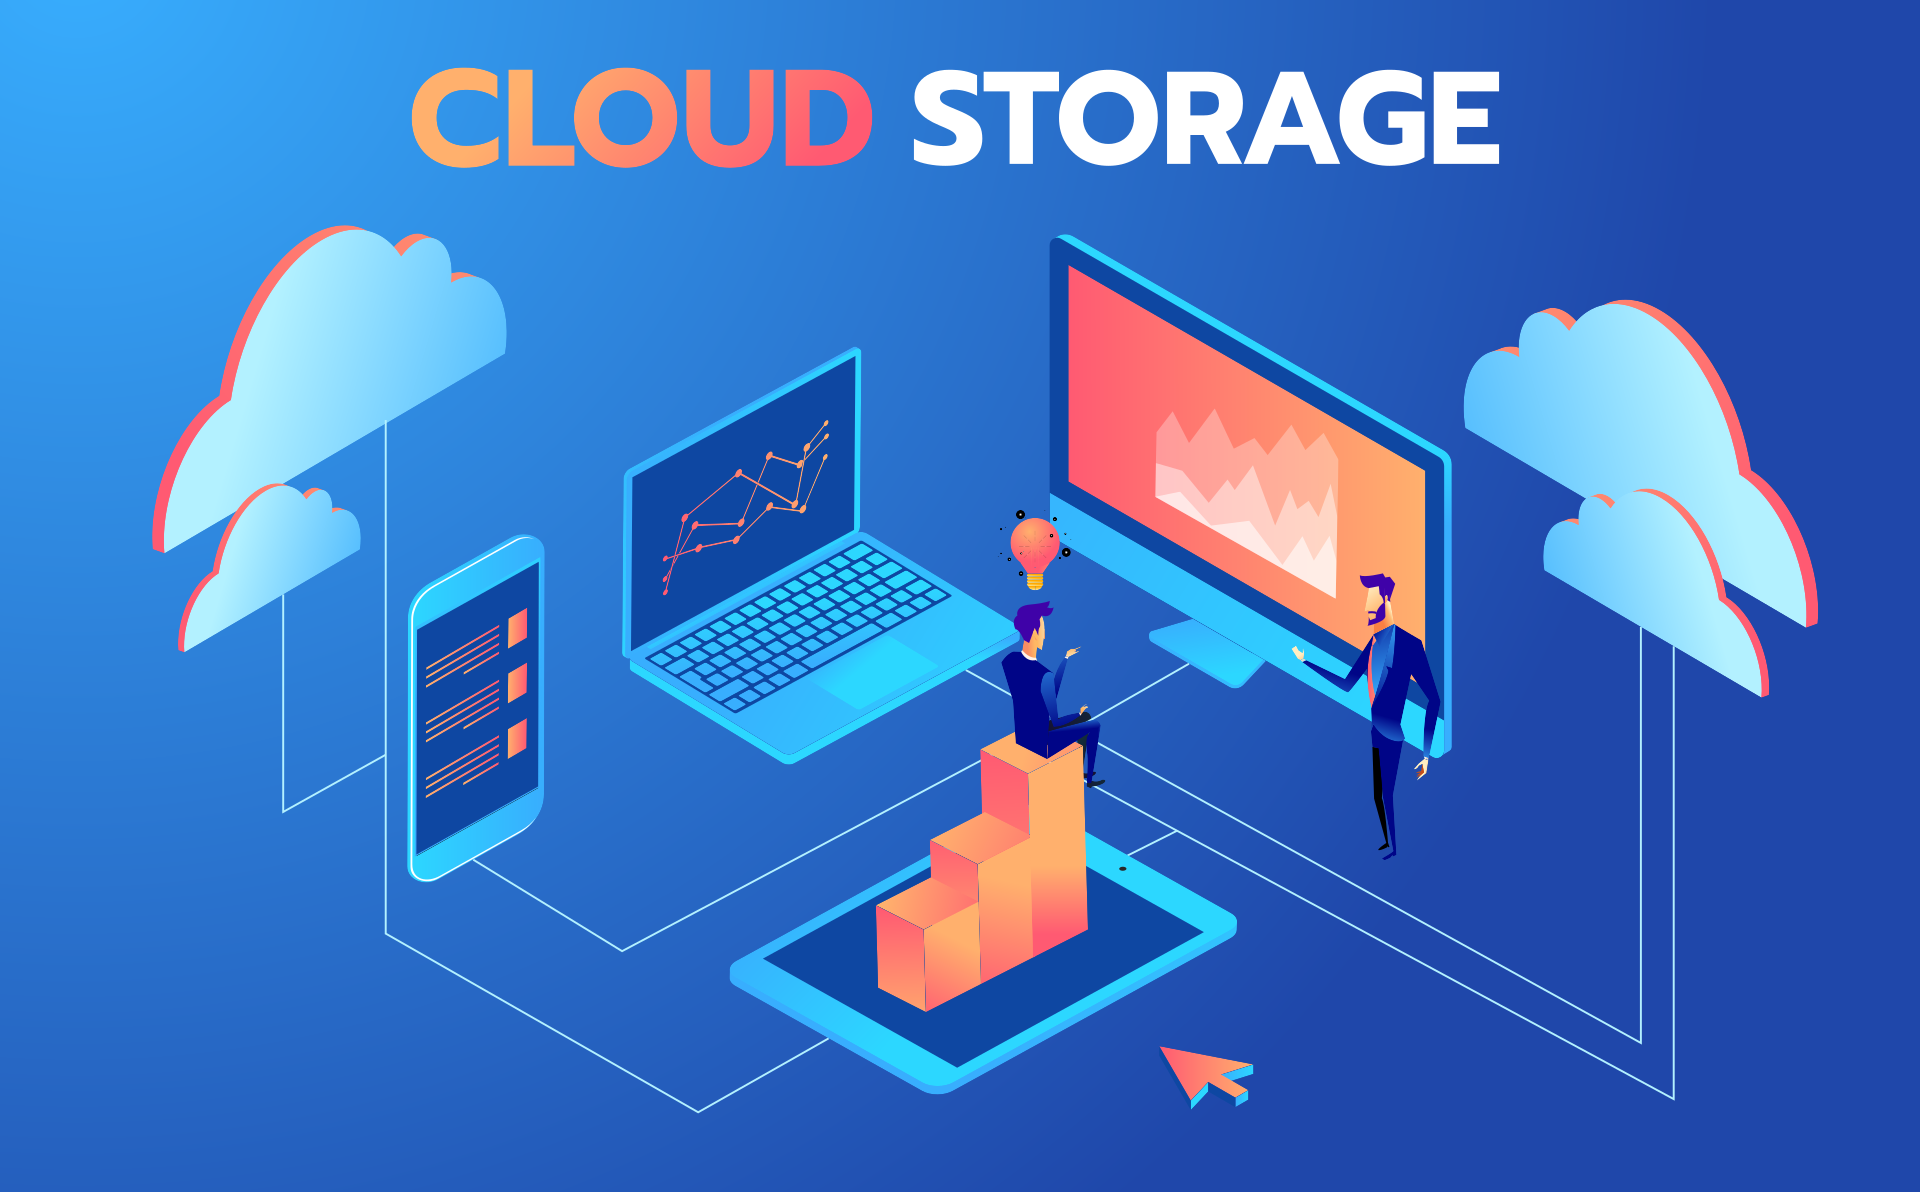 Cloud Storage and Computing - Need of changing times